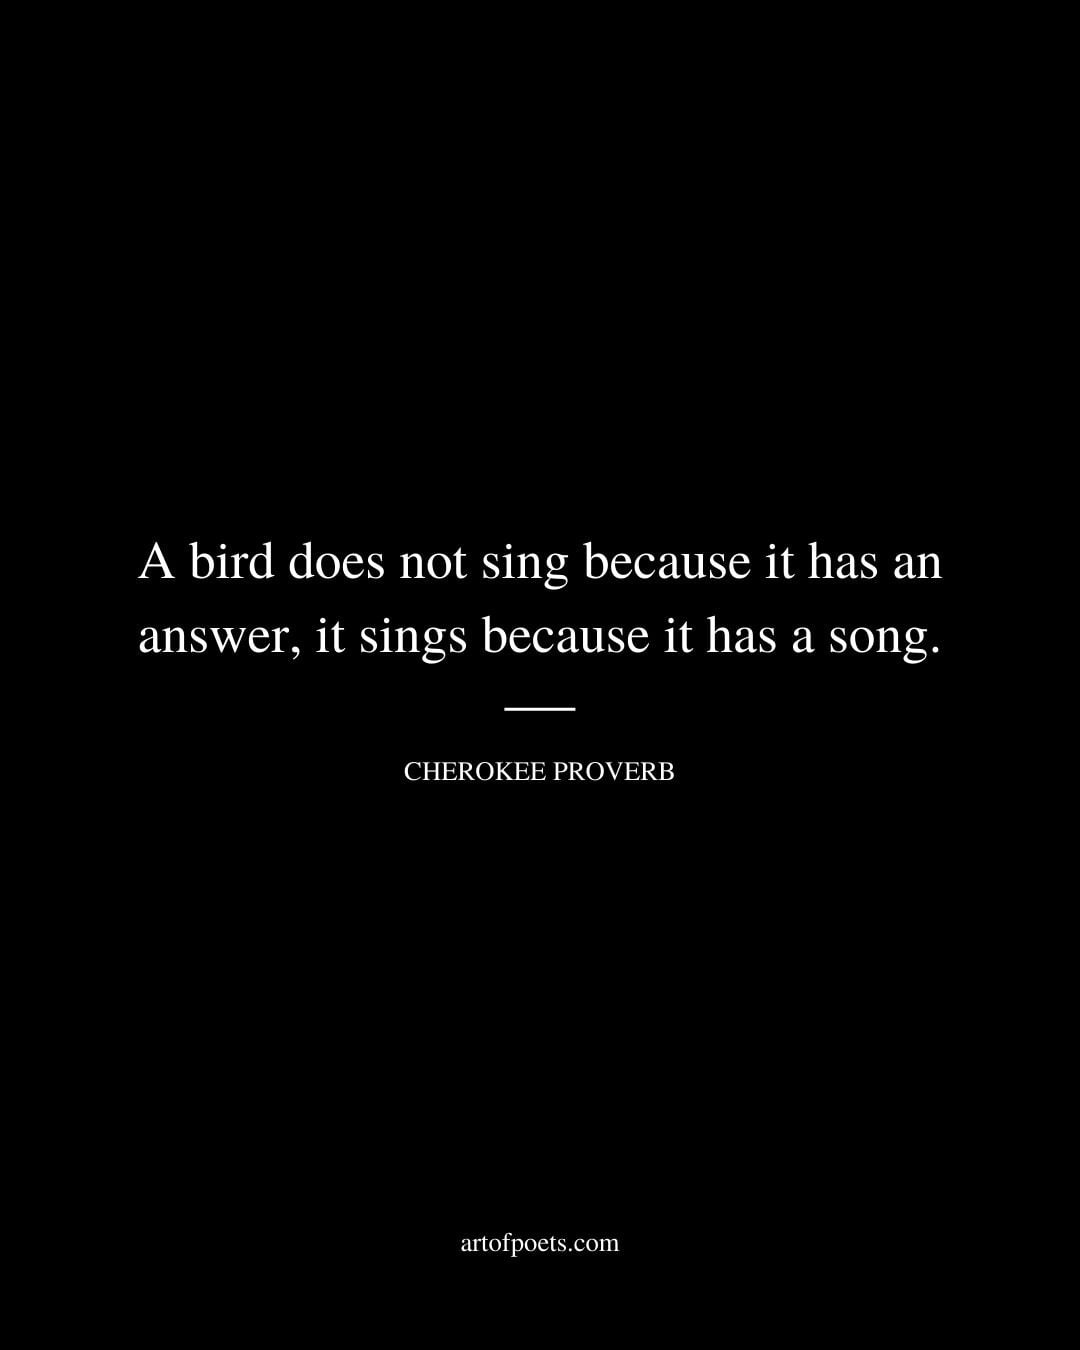 A bird does not sing because it has an answer it sings because it has a song